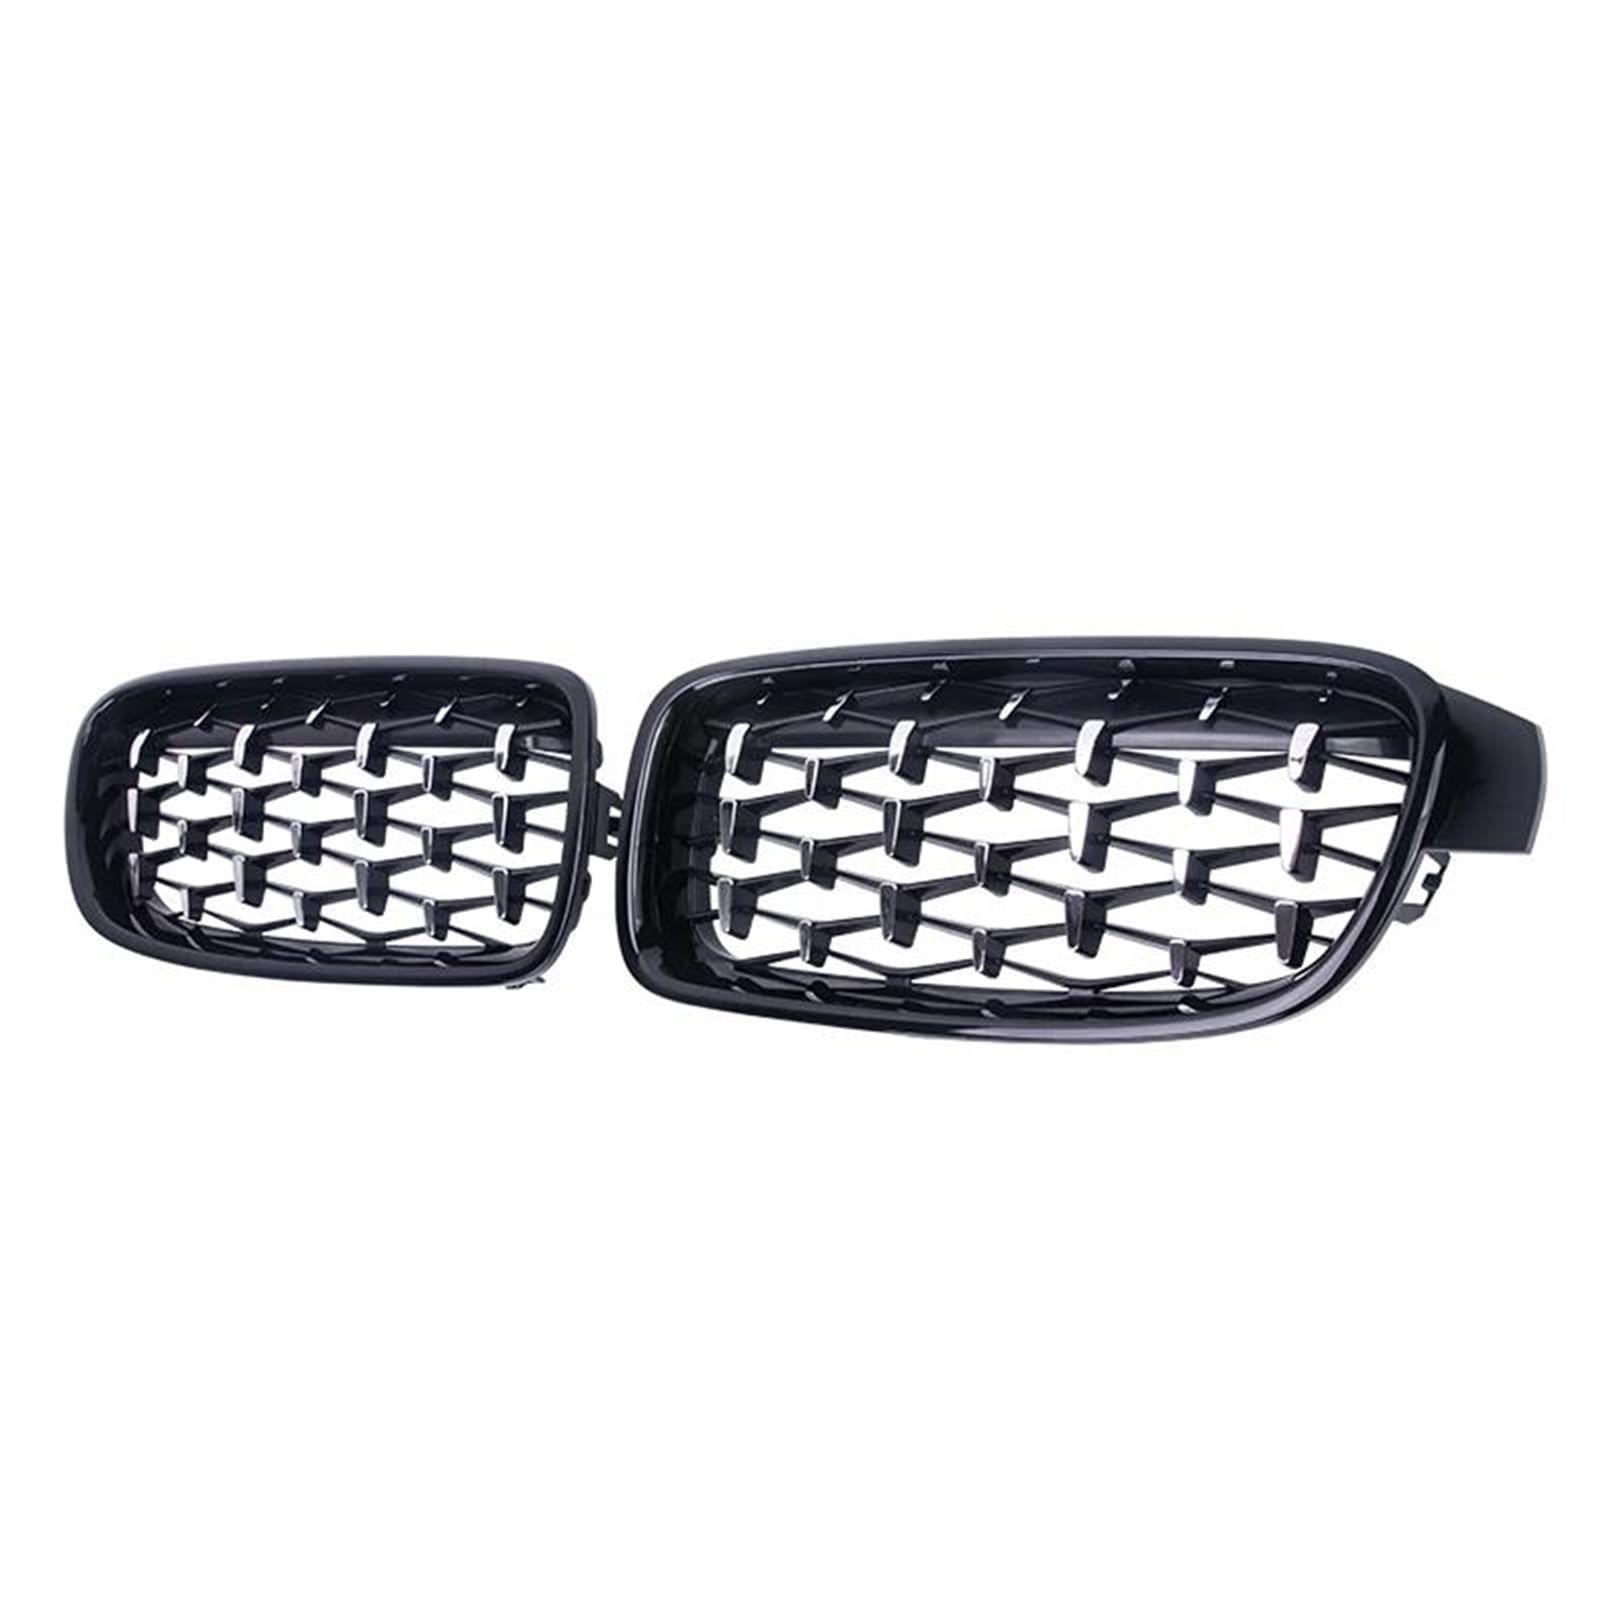 Doppel-Lamellen Grill Für 3er F30 F31 F35 325xi 320i 325i 325i 328i 330i 2012–2019, Auto-Diamant-Frontnierengrill, Racing-Grill Grill(Silver and Black) von DZST